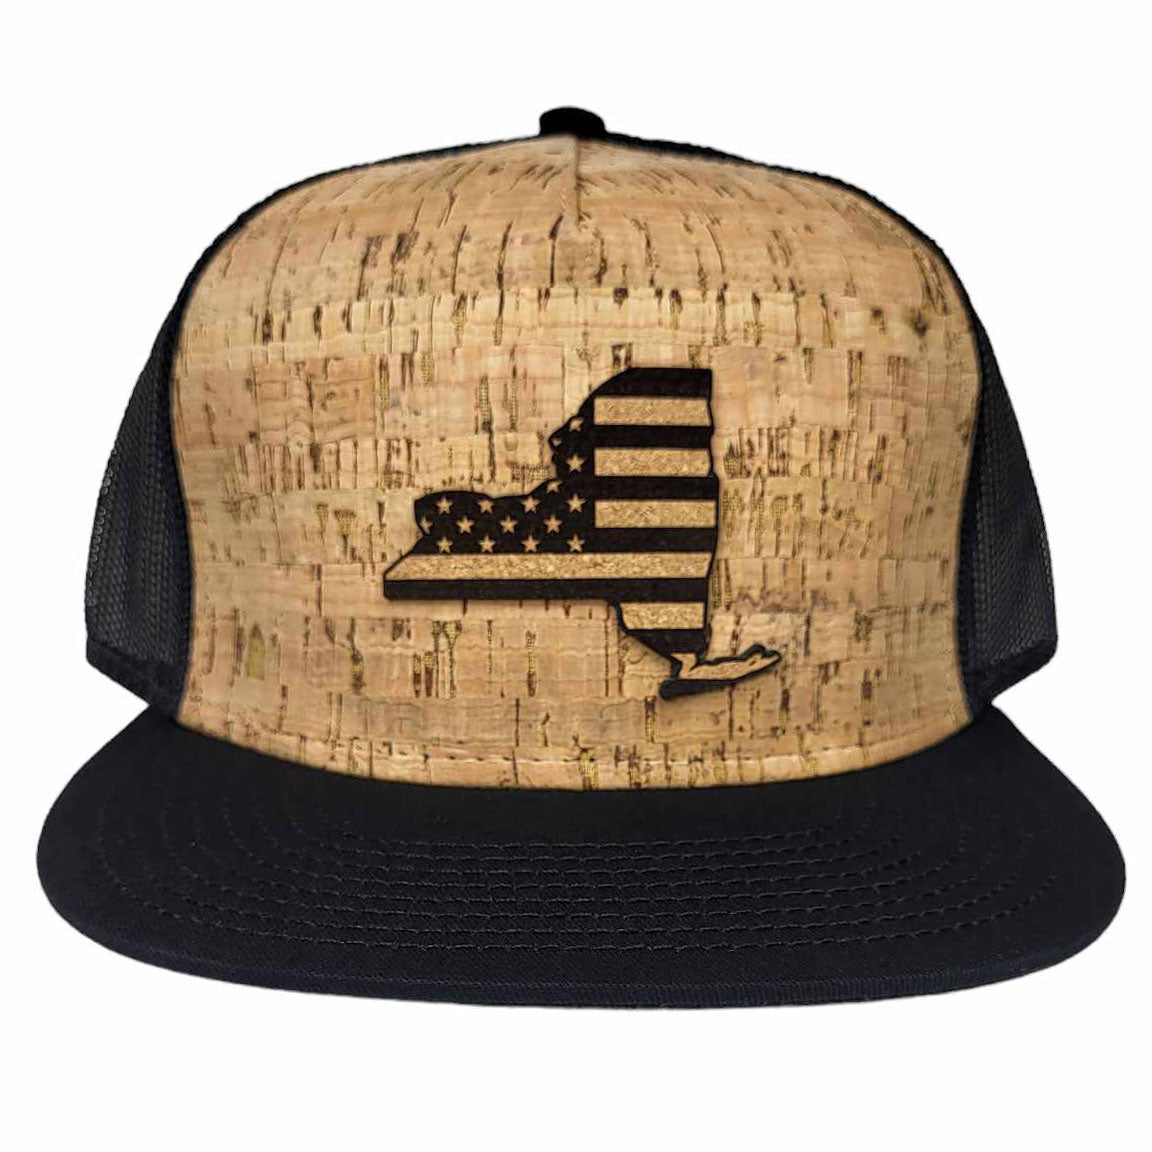 The New Yorker Cork Hat